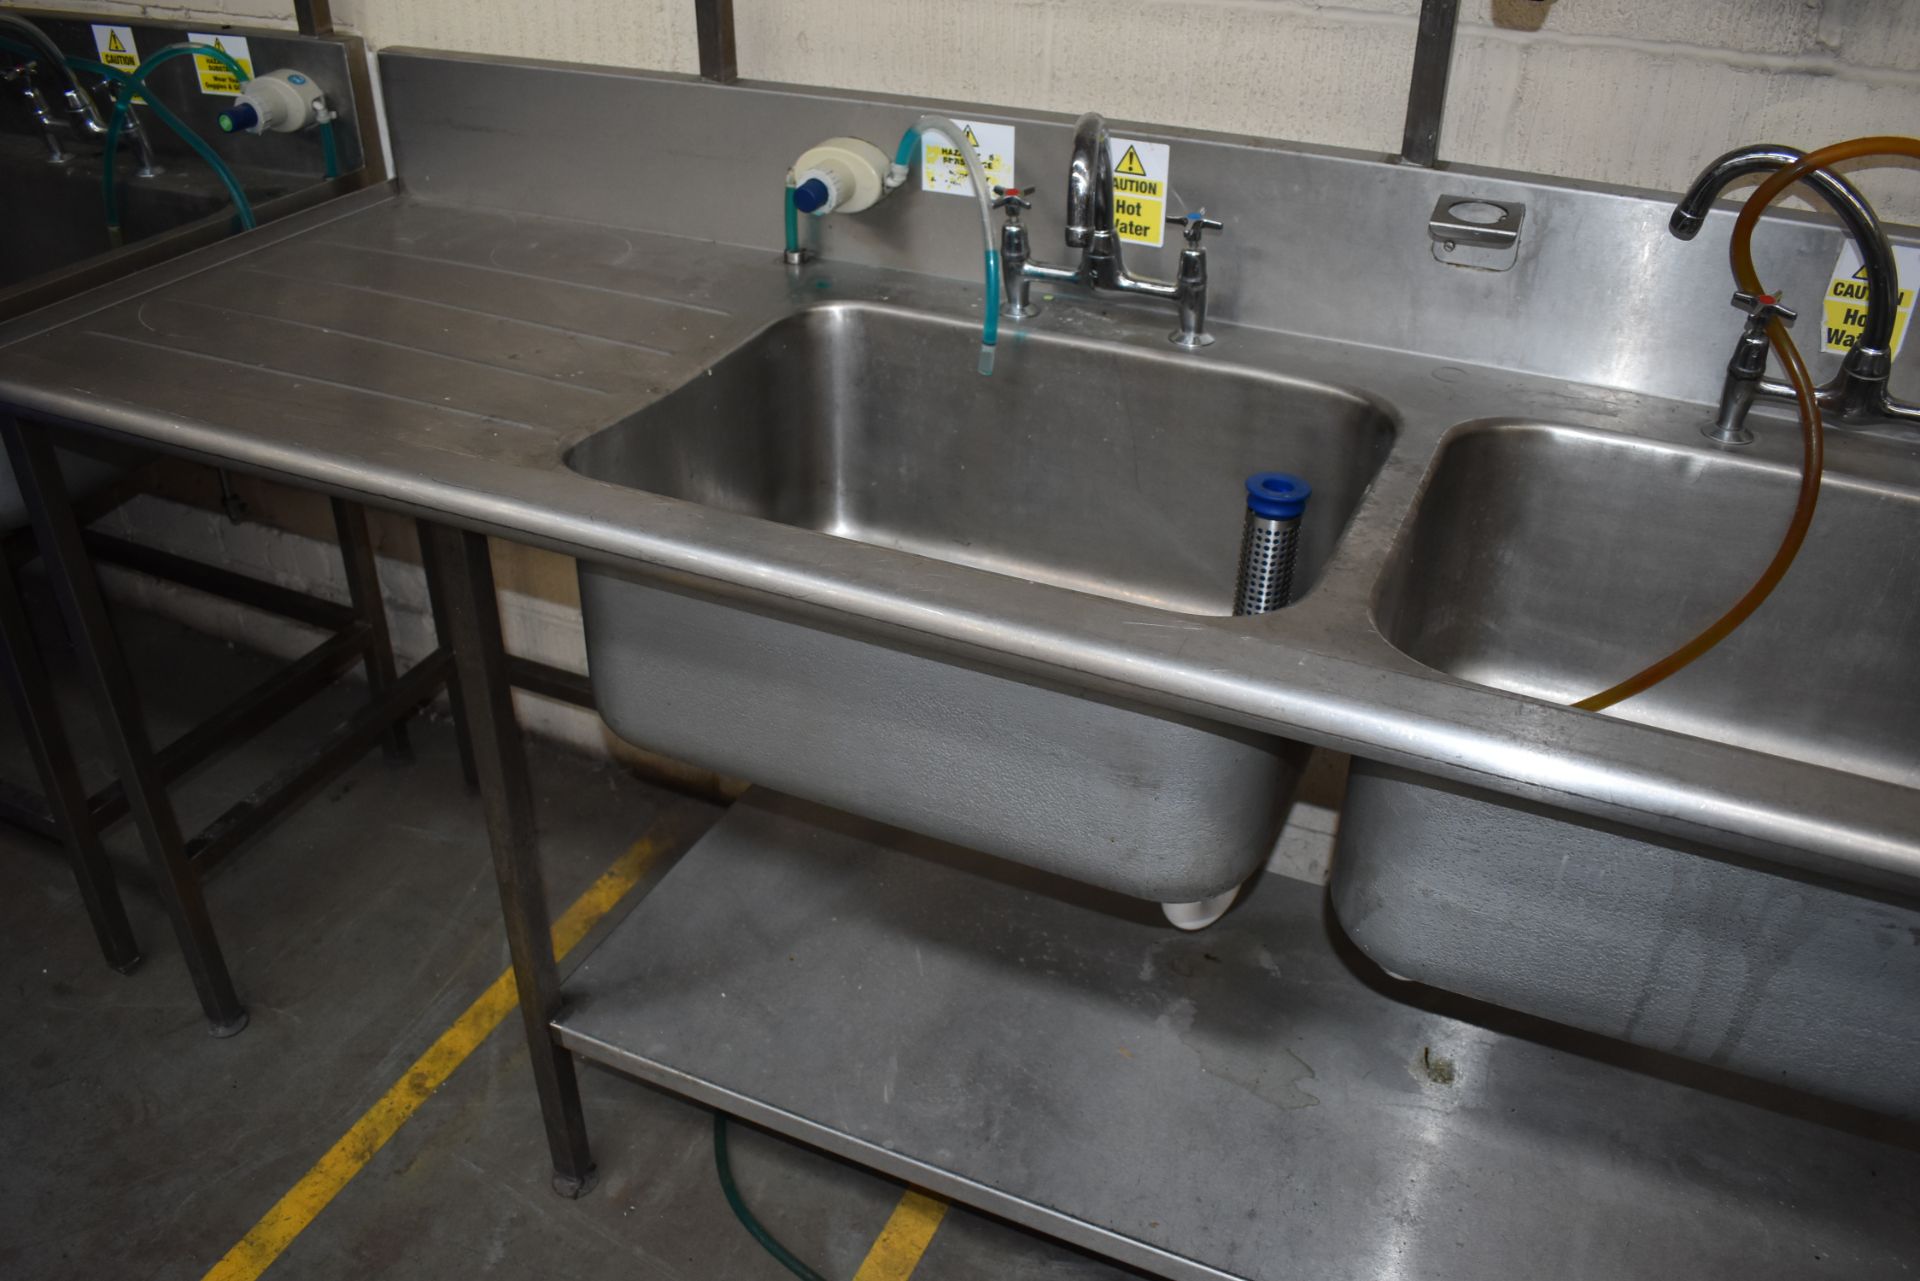 1 x Stainless Steel Commercial Wash Basin Unit With Twin Sink Bowl, Mixer Taps, Undershelf, - Image 6 of 8